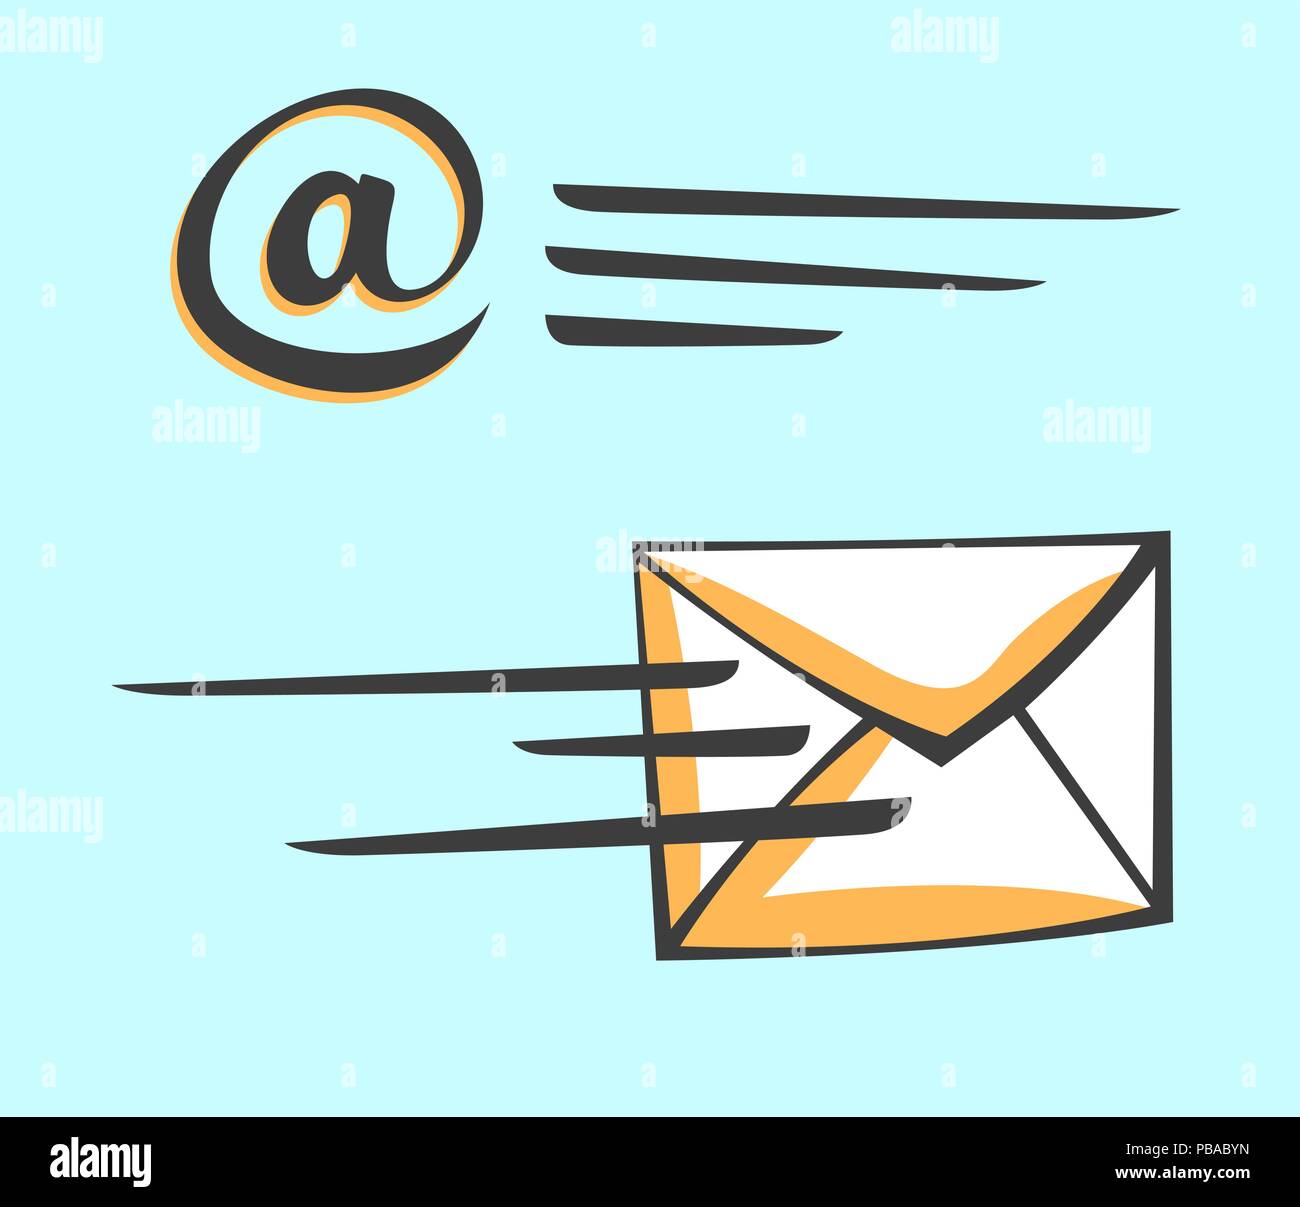 Download Email envelope icon in a motion. Cartoon pop art style ...